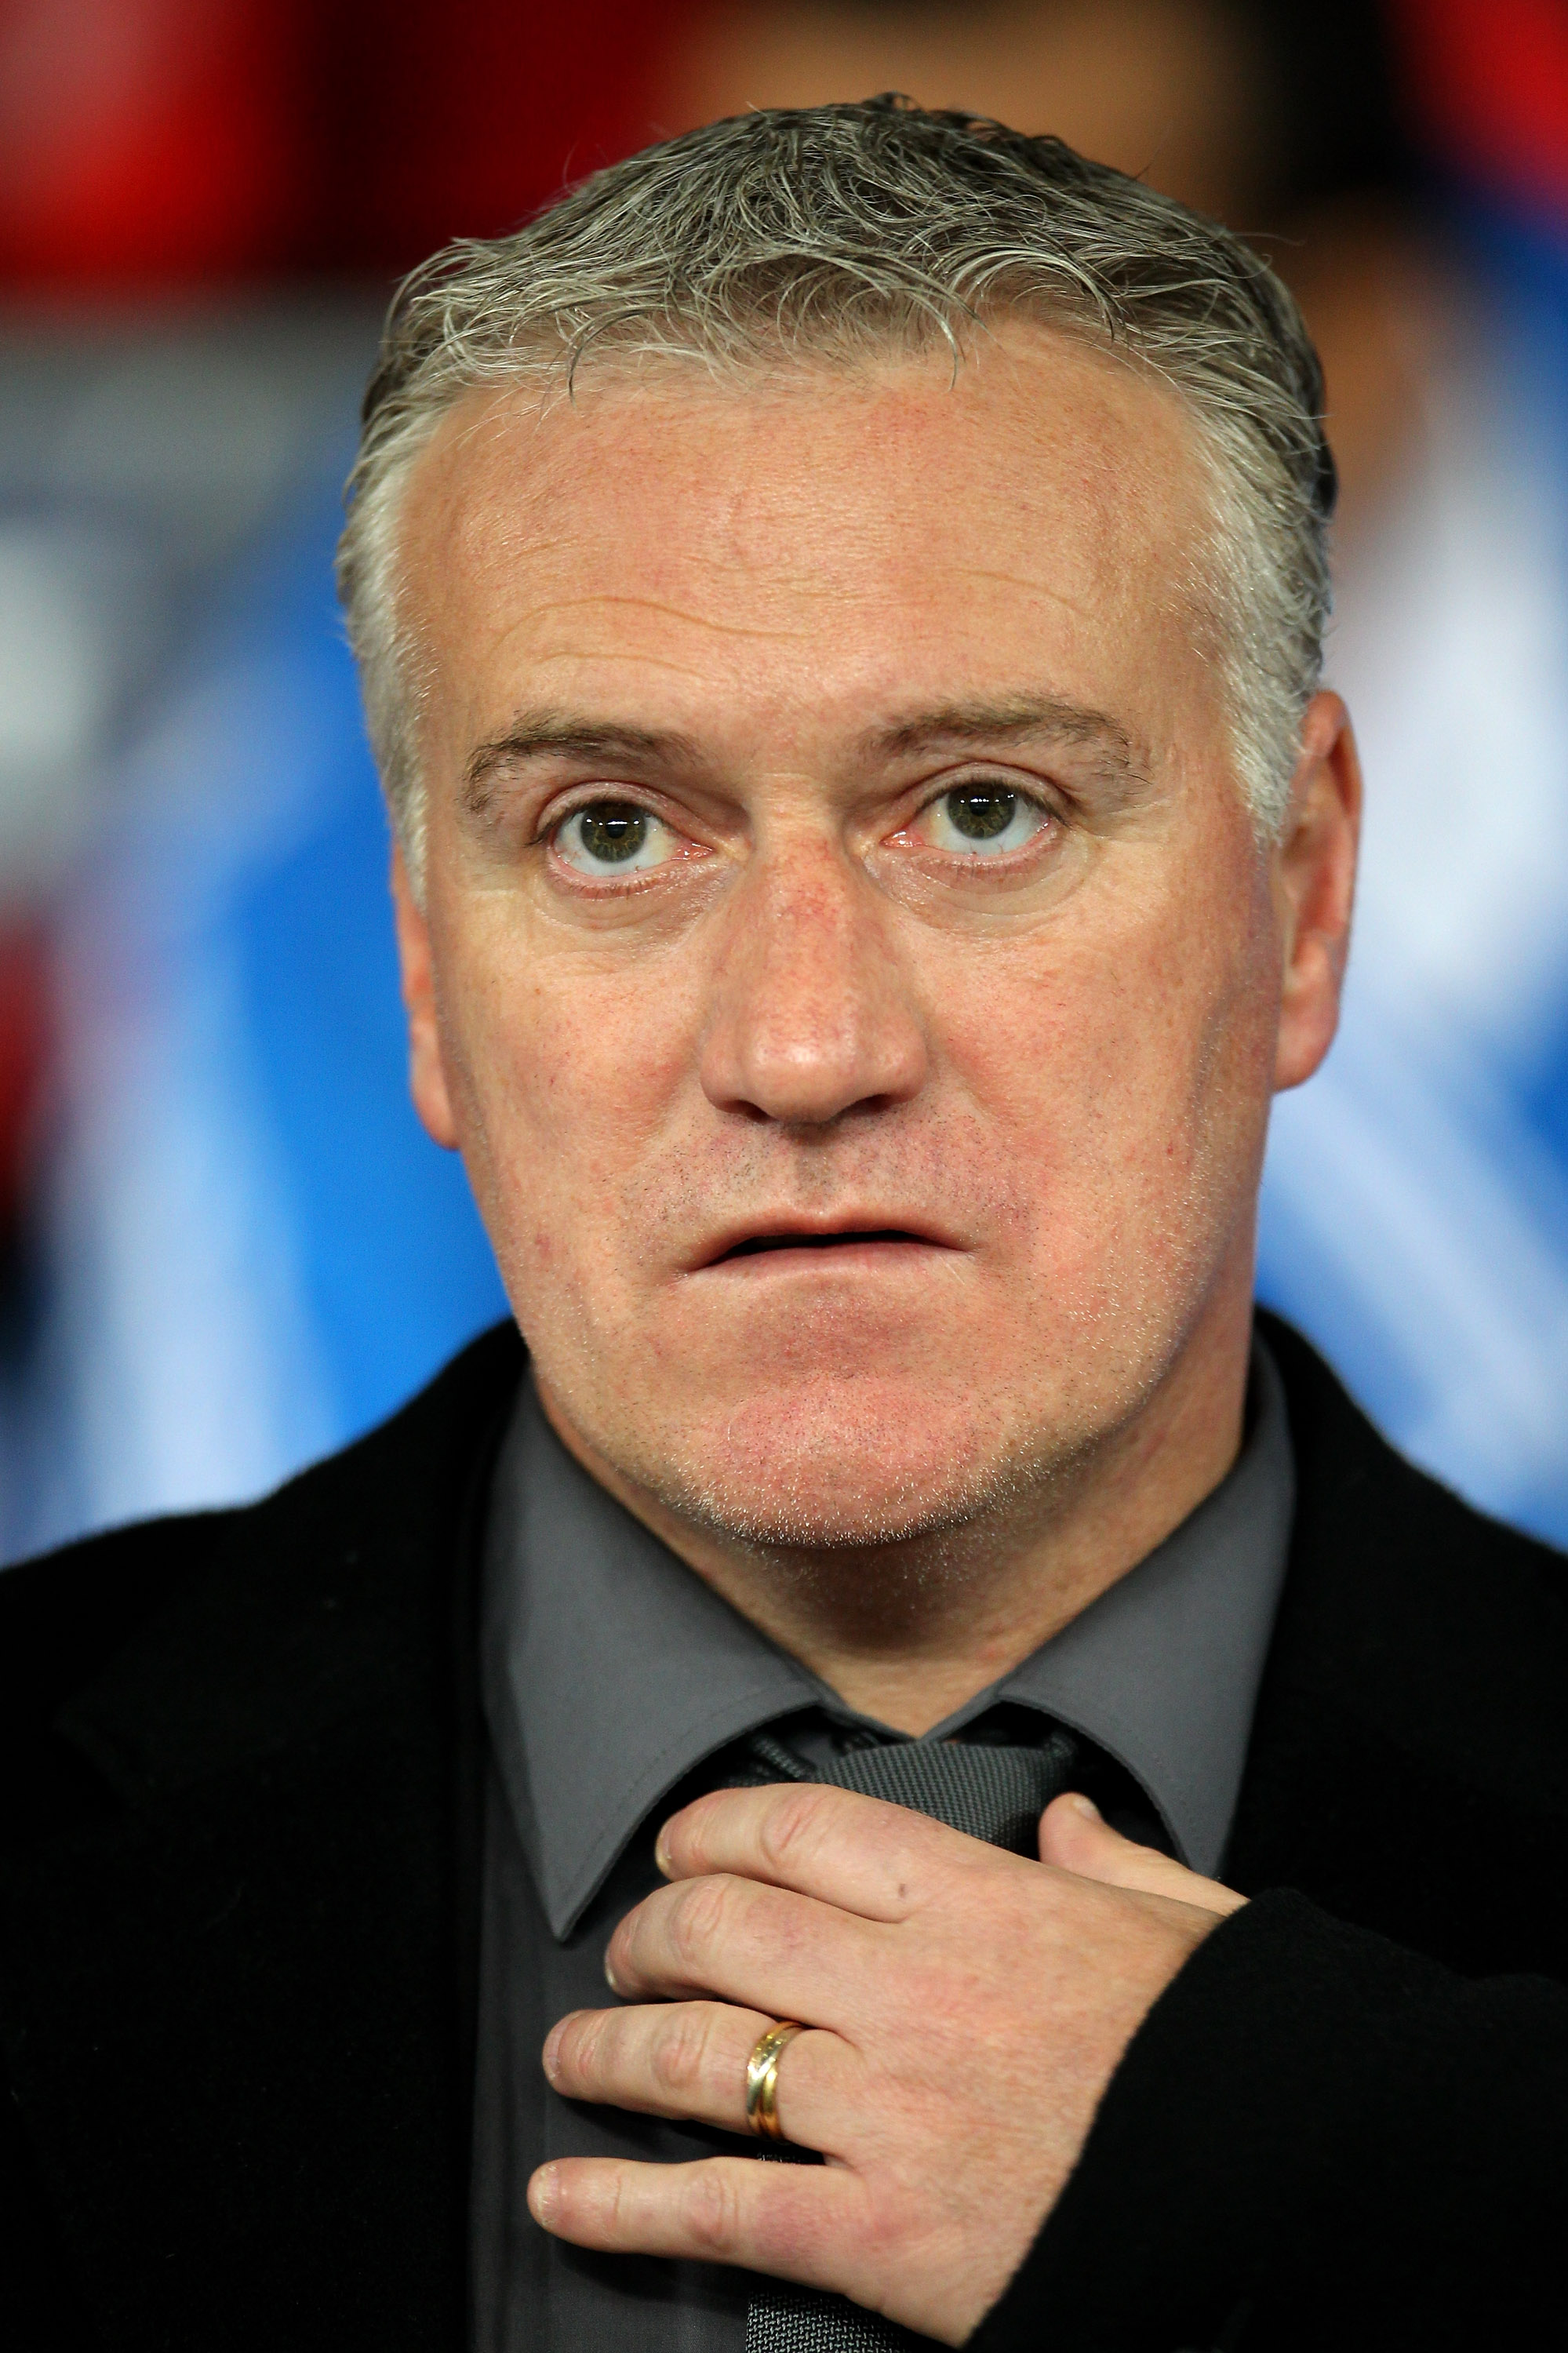 MANCHESTER, ENGLAND - MARCH 15:  Didier Deschamps coach of Marseille looks on ahead of the UEFA Champions League round of 16 second leg match between Manchester United and Marseille at Old Trafford on March 15, 2011 in Manchester, England.  (Photo by Alex